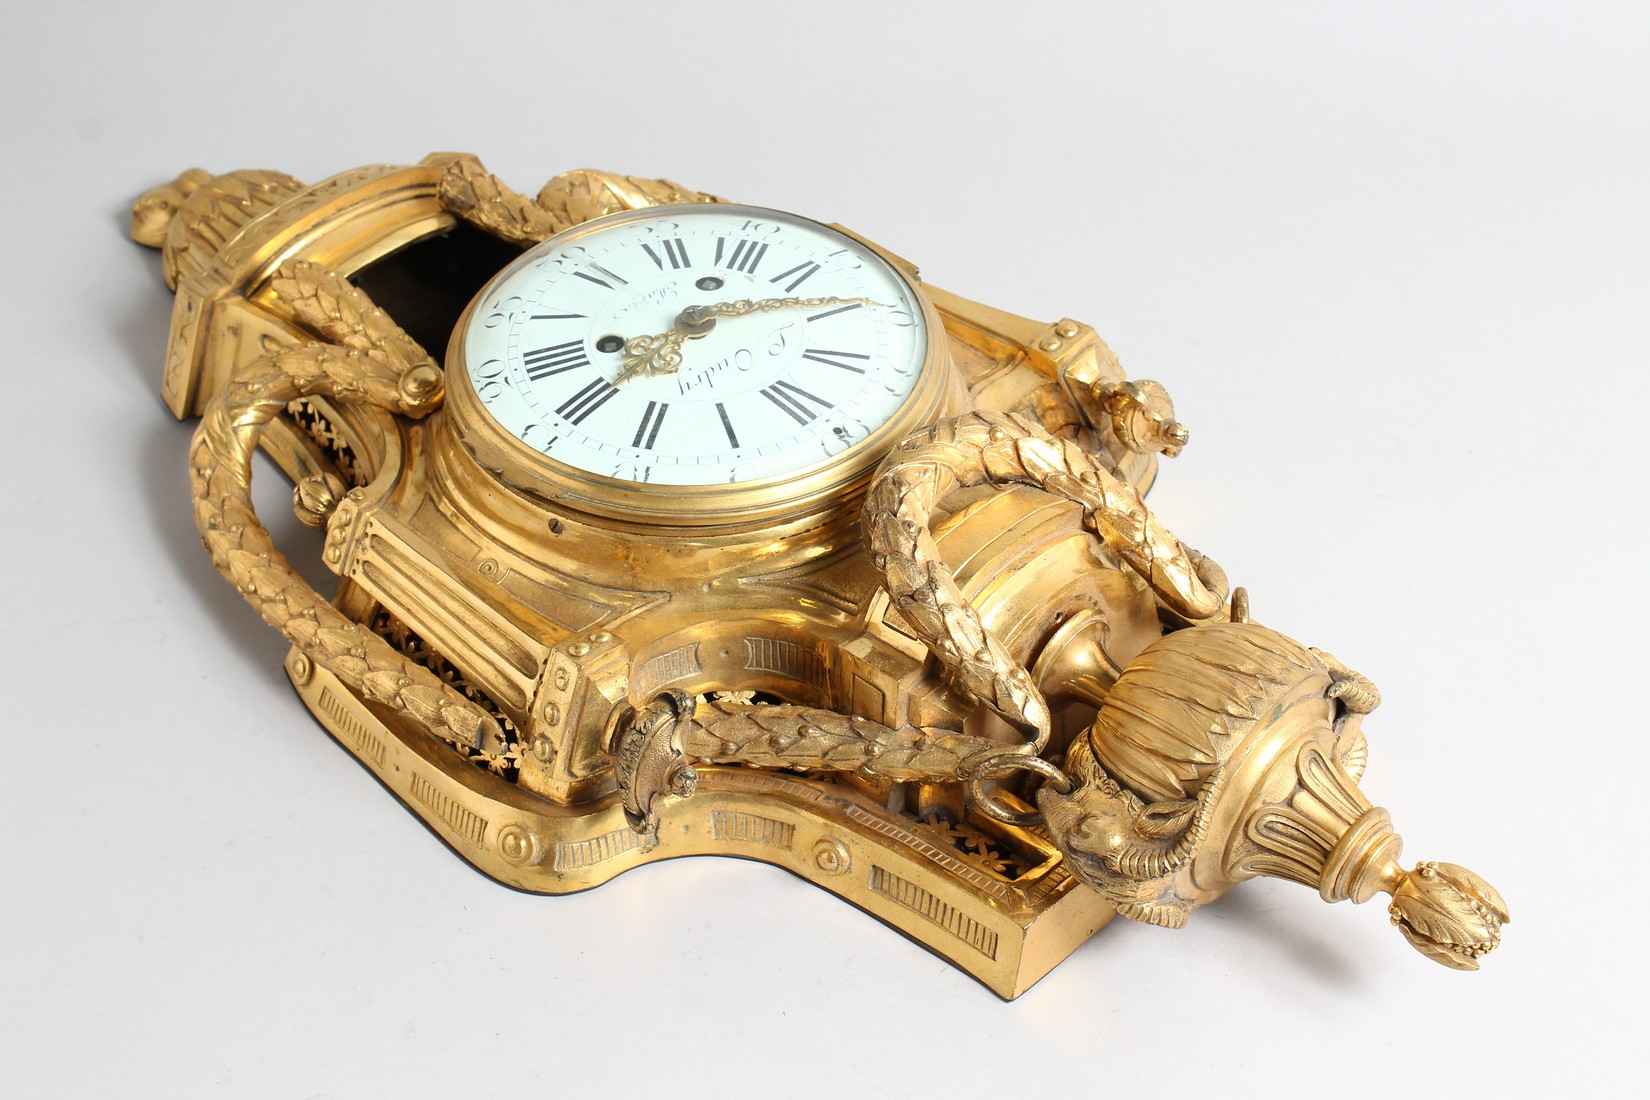 A 19TH CENTURY FRENCH ORMOLU CARTEL CLOCK with eight day movement, enameled dial with Roman numerals - Image 2 of 6